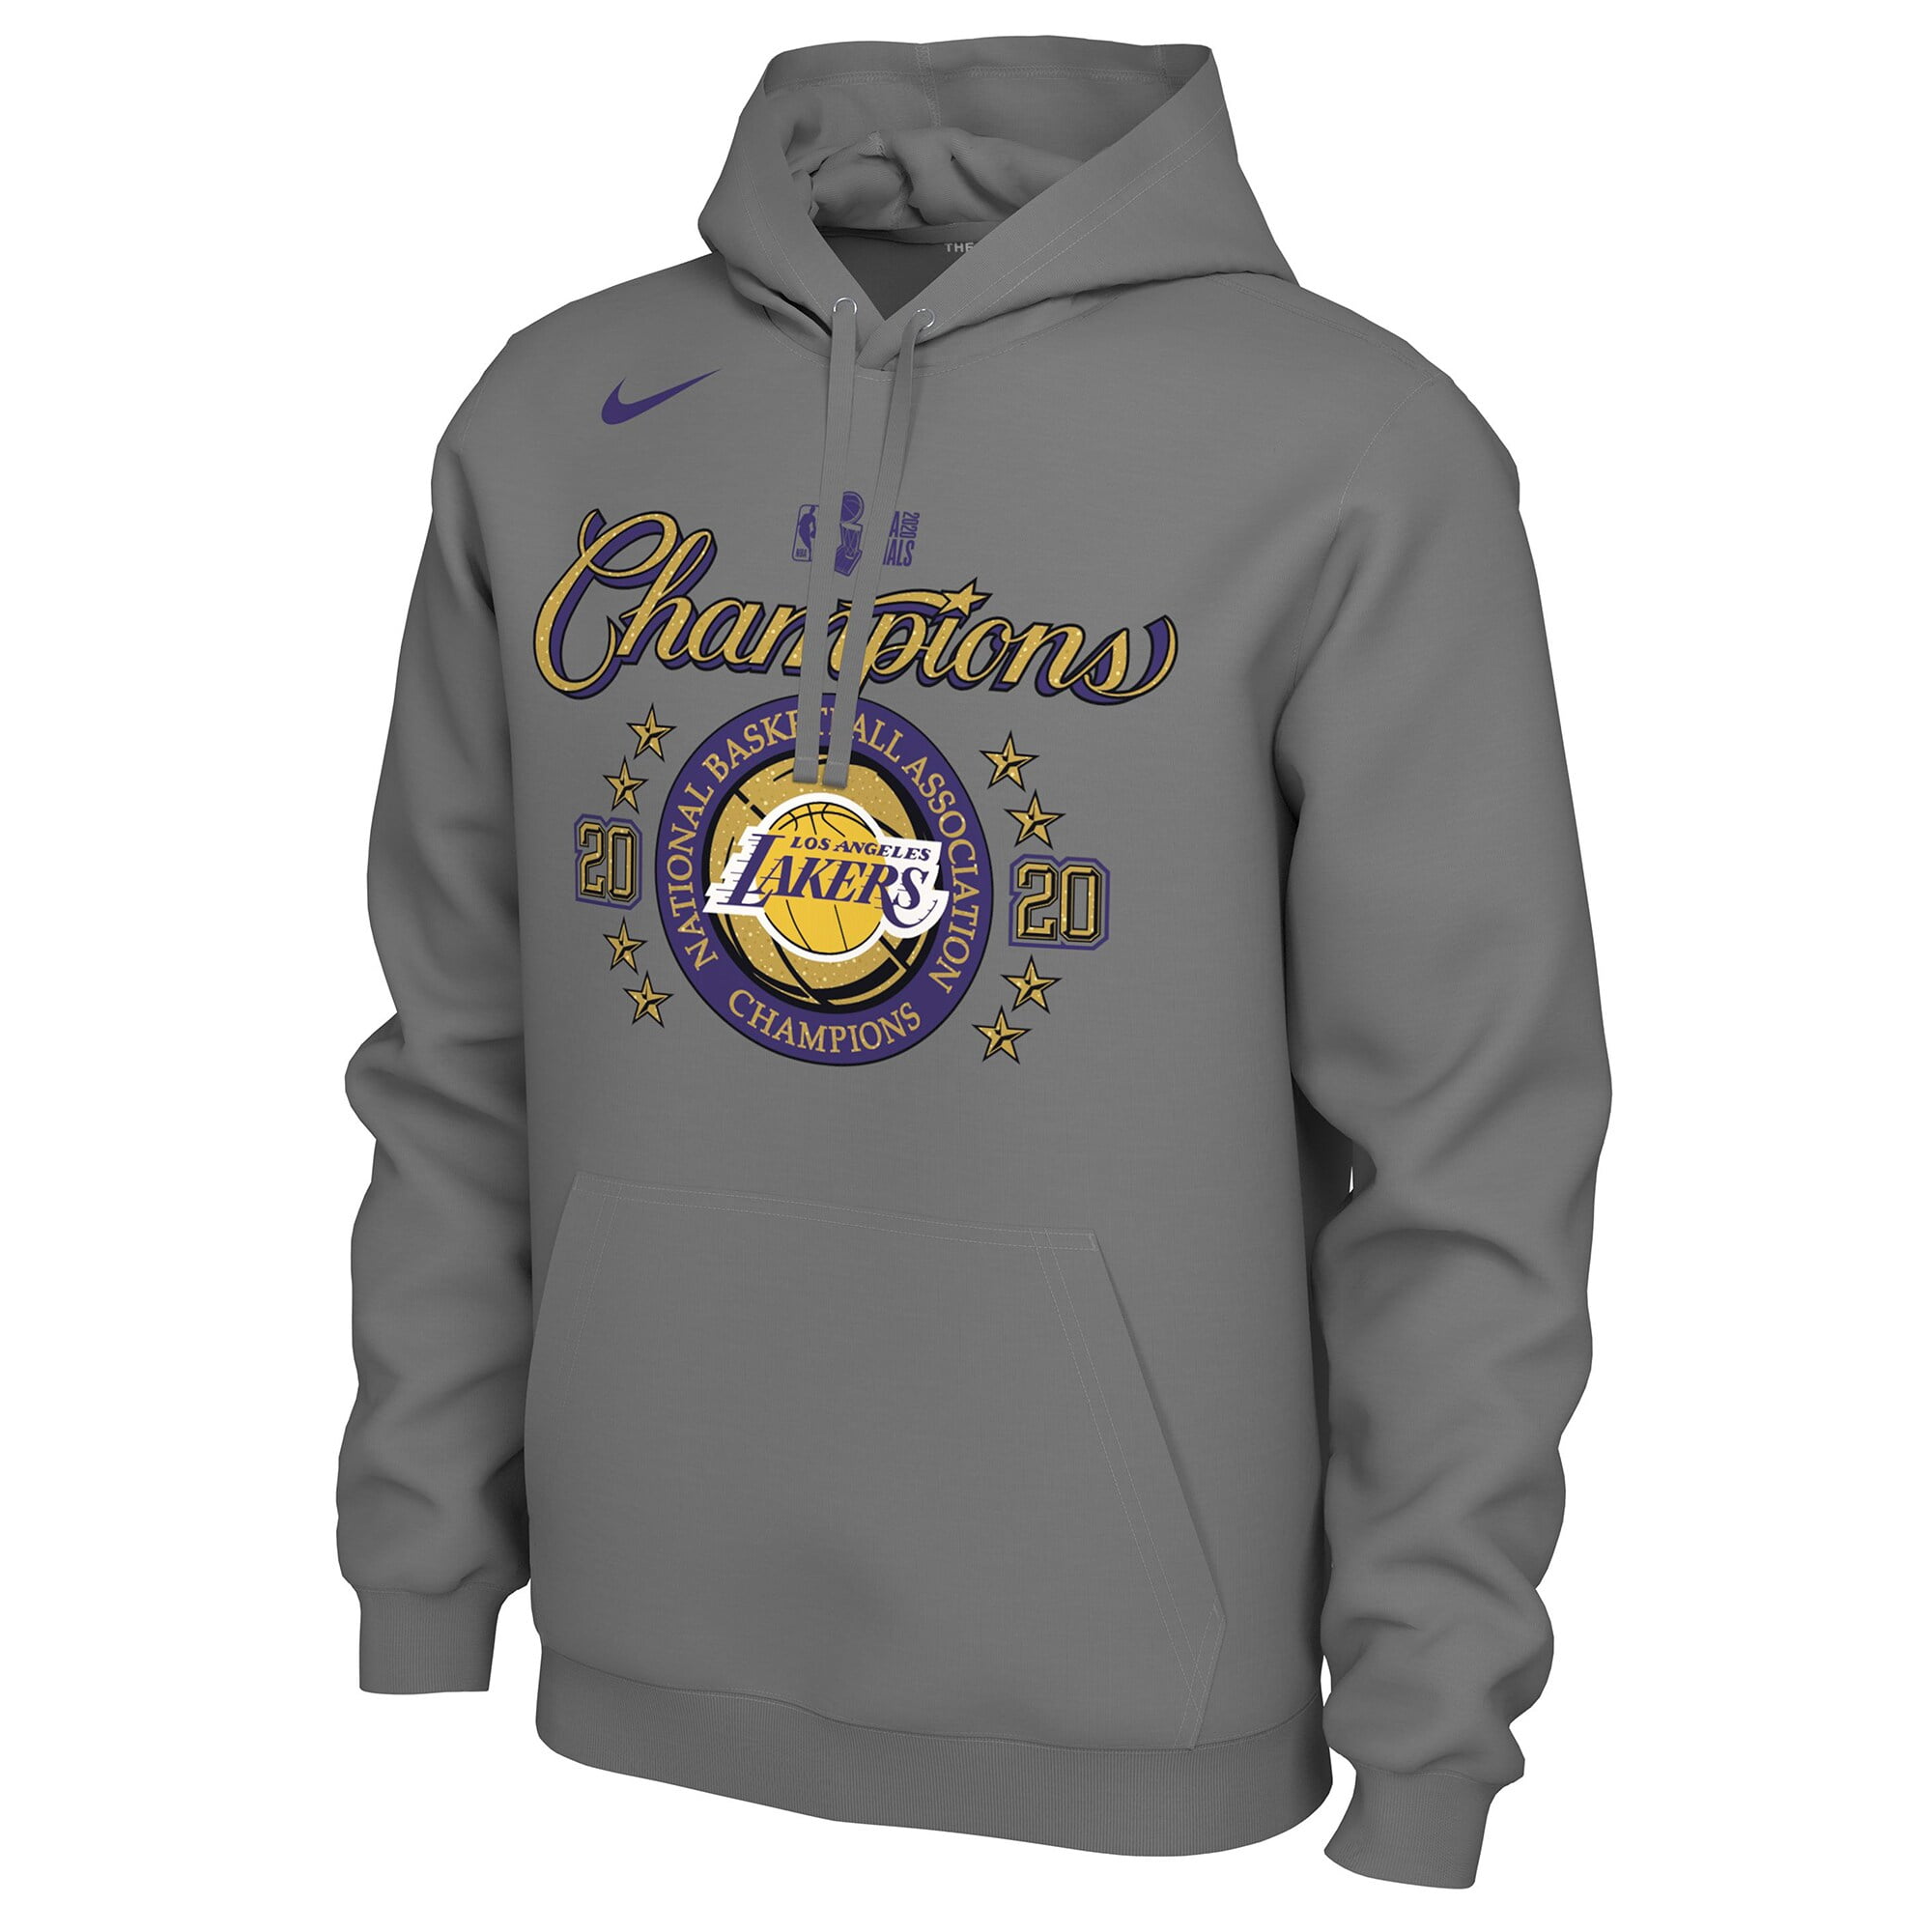 nike lakers pullover